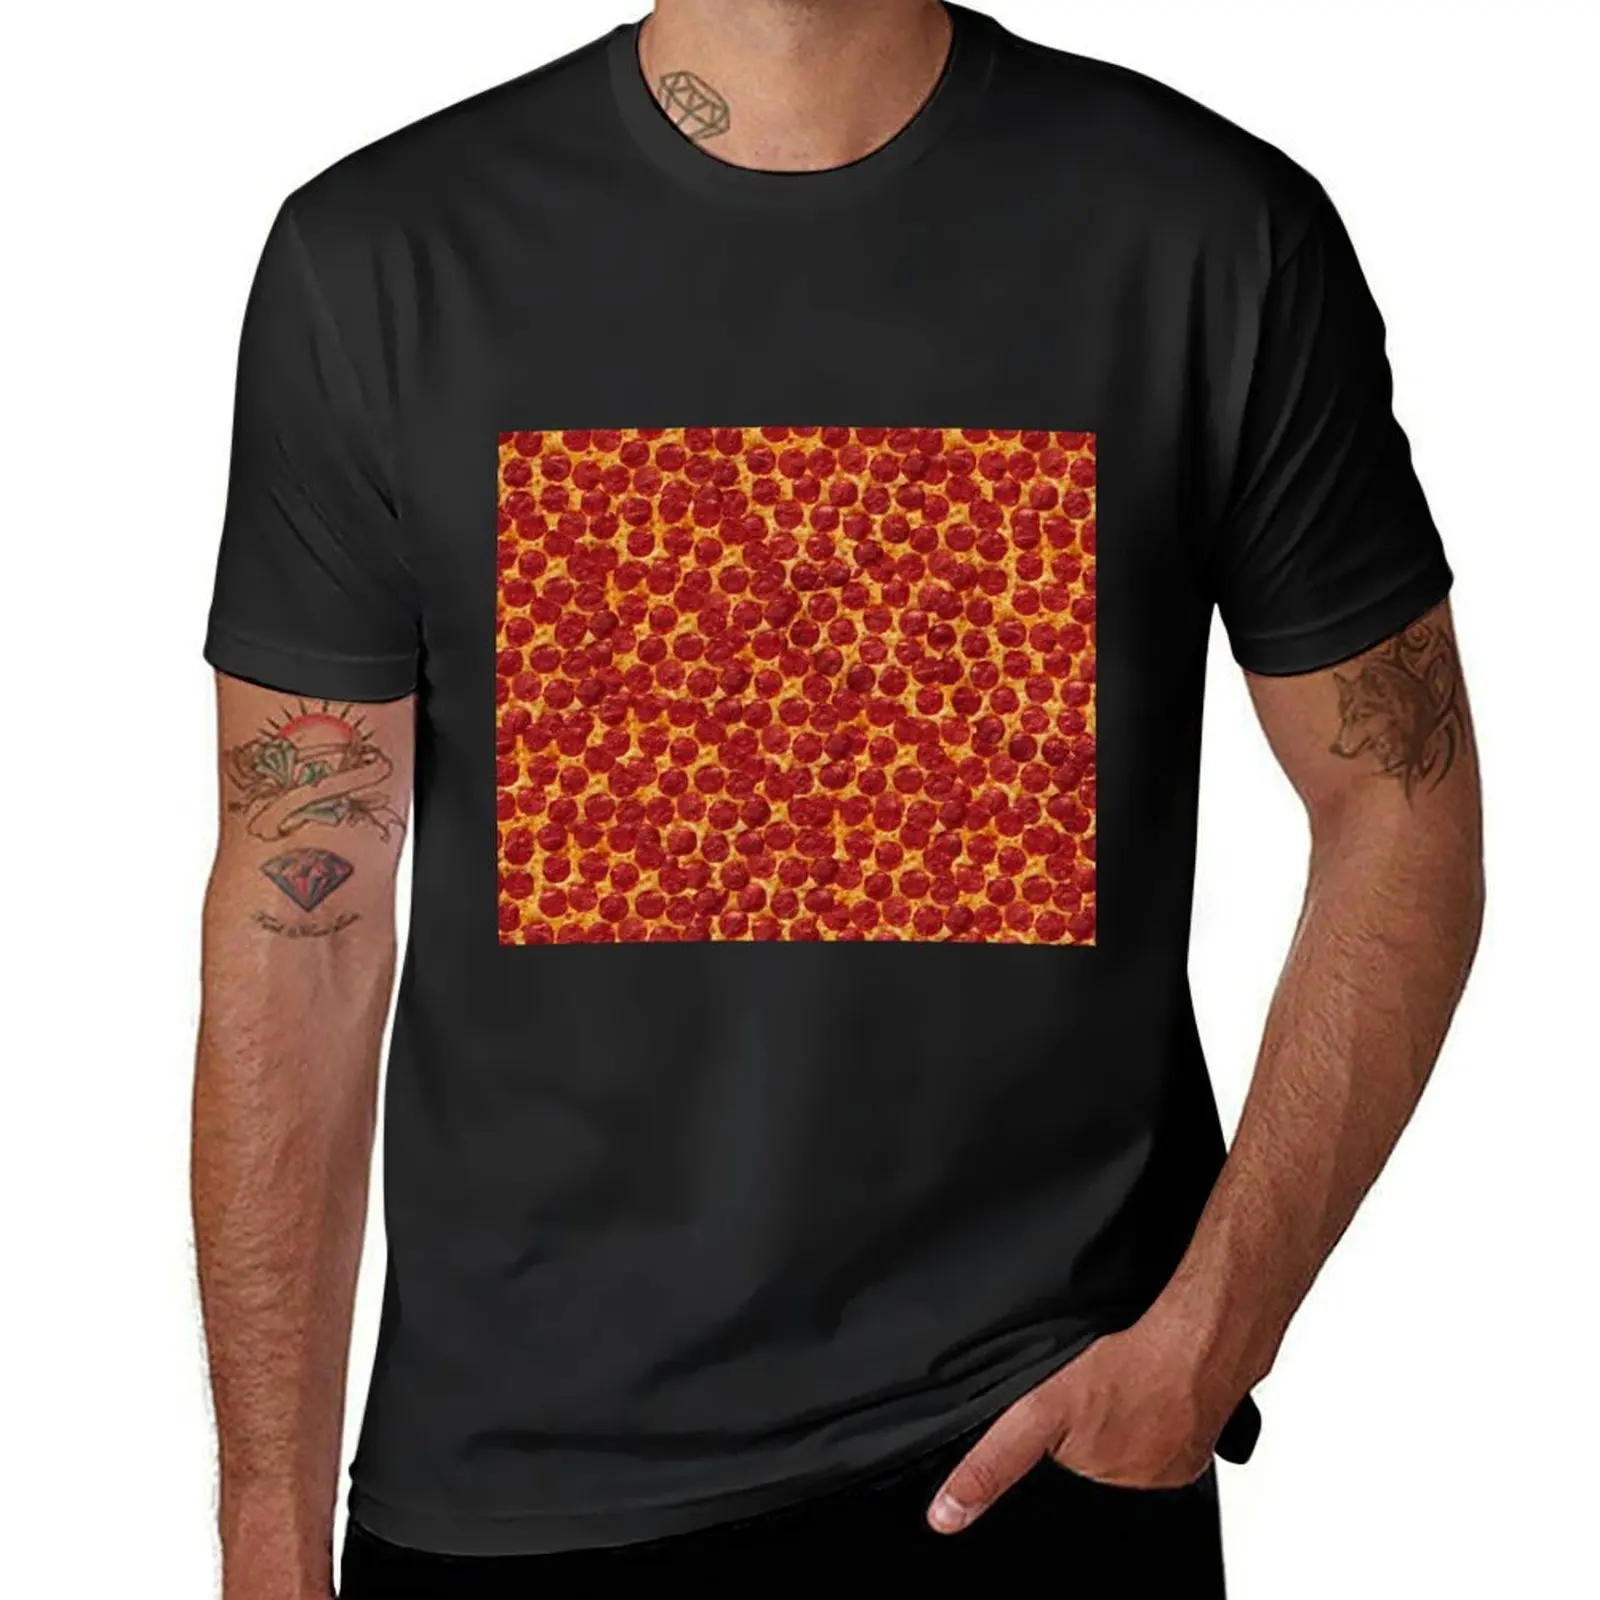 

Funny Pepperoni Pizza Food Blanket T-shirt quick-drying anime customs design your own customs t shirt men